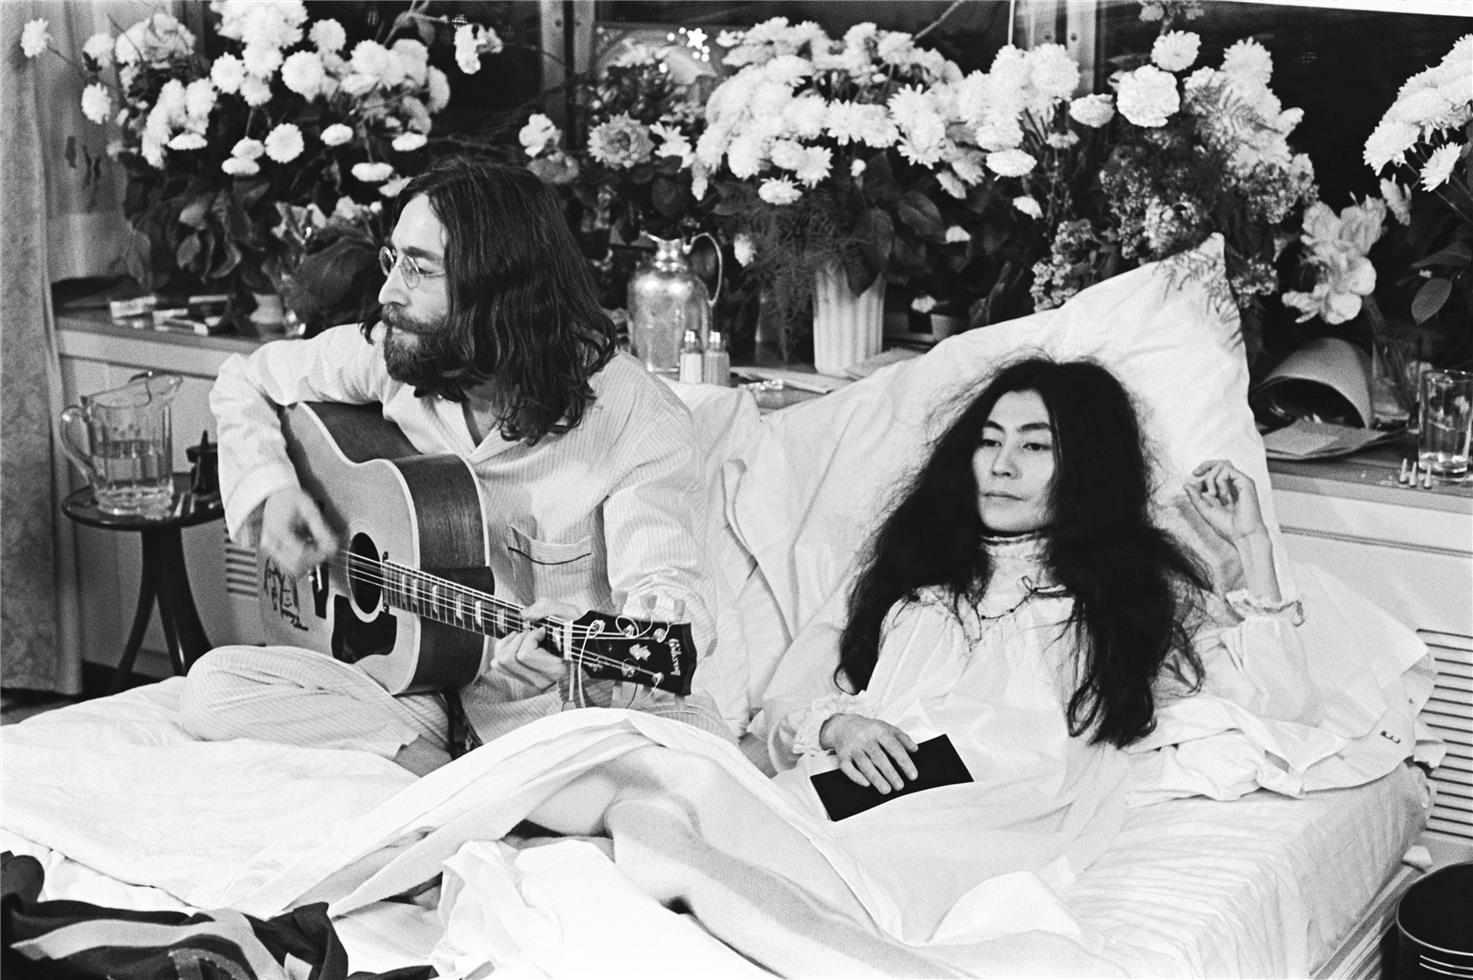 Stephen Sammons Black and White Photograph - John Lennon, Yoko Ono, Bed-In For Peace, Montreal, Canada 1969